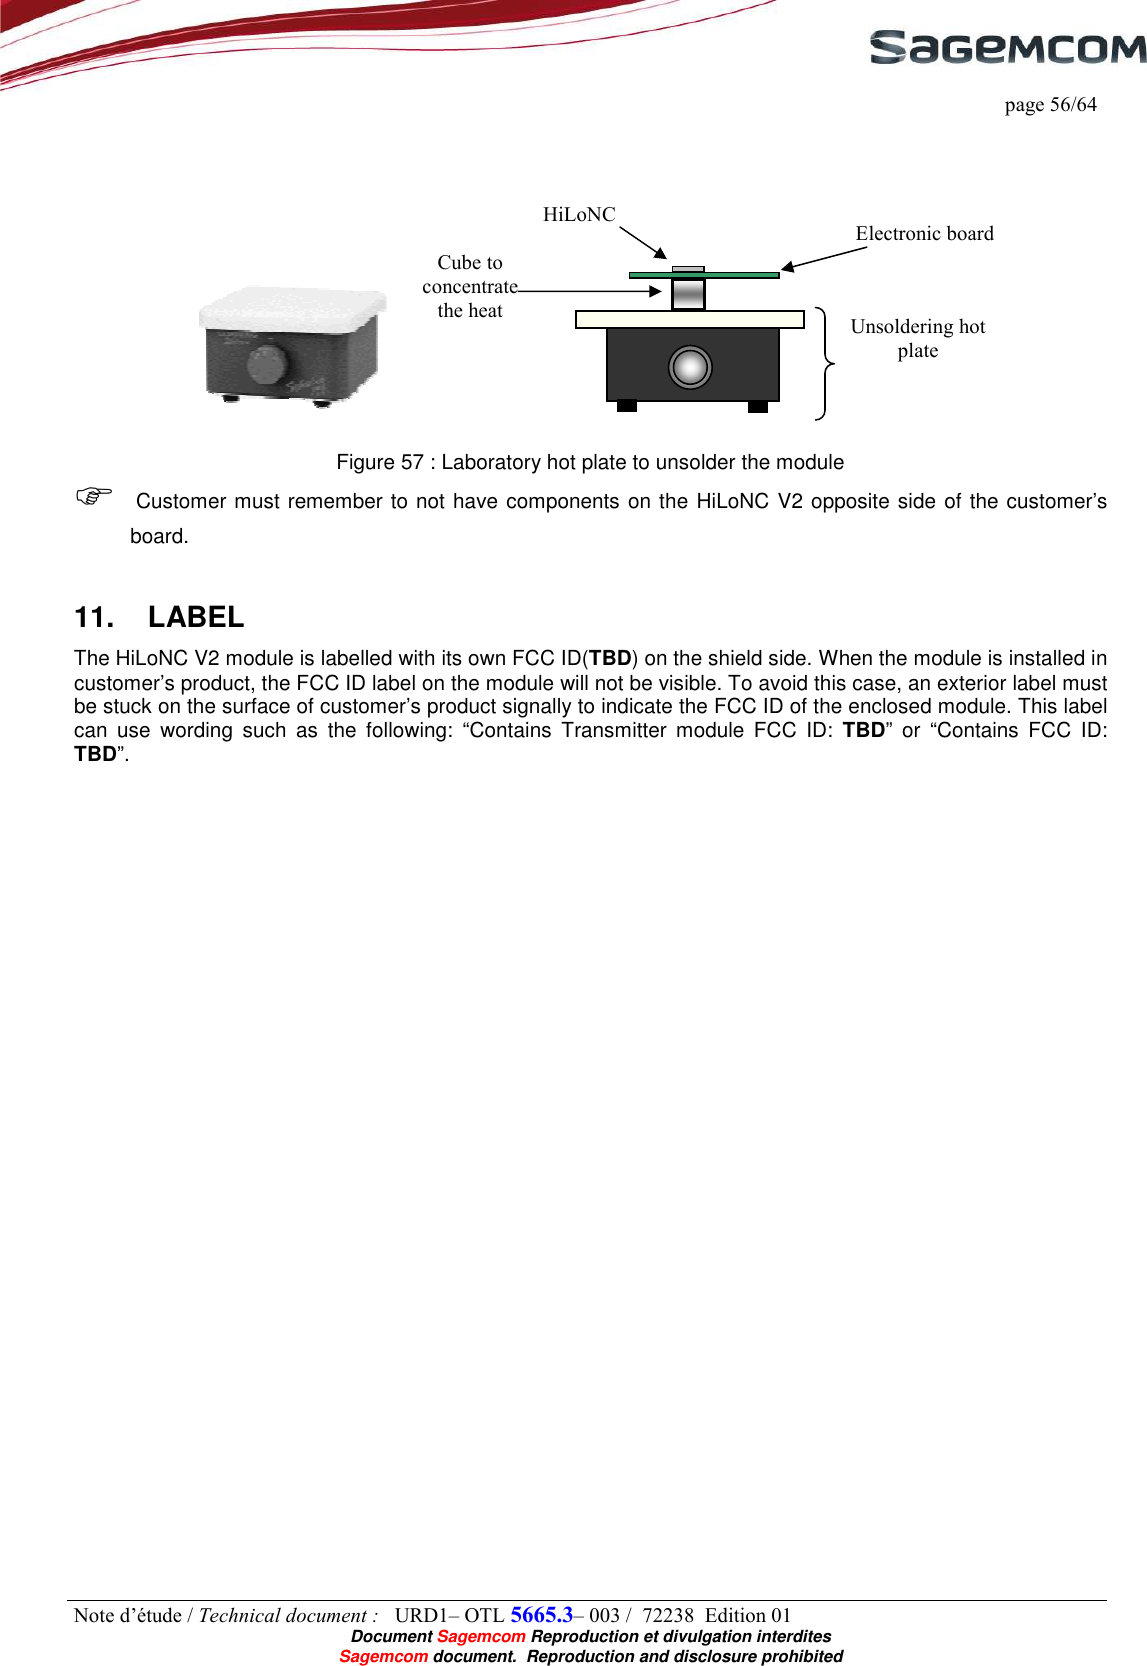     page 56/64 Note d’étude / Technical document :   URD1– OTL 5665.3– 003 /  72238  Edition 01  Document Sagemcom Reproduction et divulgation interdites Sagemcom document.  Reproduction and disclosure prohibited      Figure 57 : Laboratory hot plate to unsolder the module  Customer must remember to not have components on the HiLoNC V2 opposite side of the customer’s board. 11.  LABEL The HiLoNC V2 module is labelled with its own FCC ID(TBD) on the shield side. When the module is installed in customer’s product, the FCC ID label on the module will not be visible. To avoid this case, an exterior label must be stuck on the surface of customer’s product signally to indicate the FCC ID of the enclosed module. This label can  use  wording  such  as  the  following:  “Contains  Transmitter  module  FCC  ID:  TBD”  or  “Contains  FCC  ID: TBD”. Electronic board HiLoNC Cube to concentrate the heat  Unsoldering hot plate 